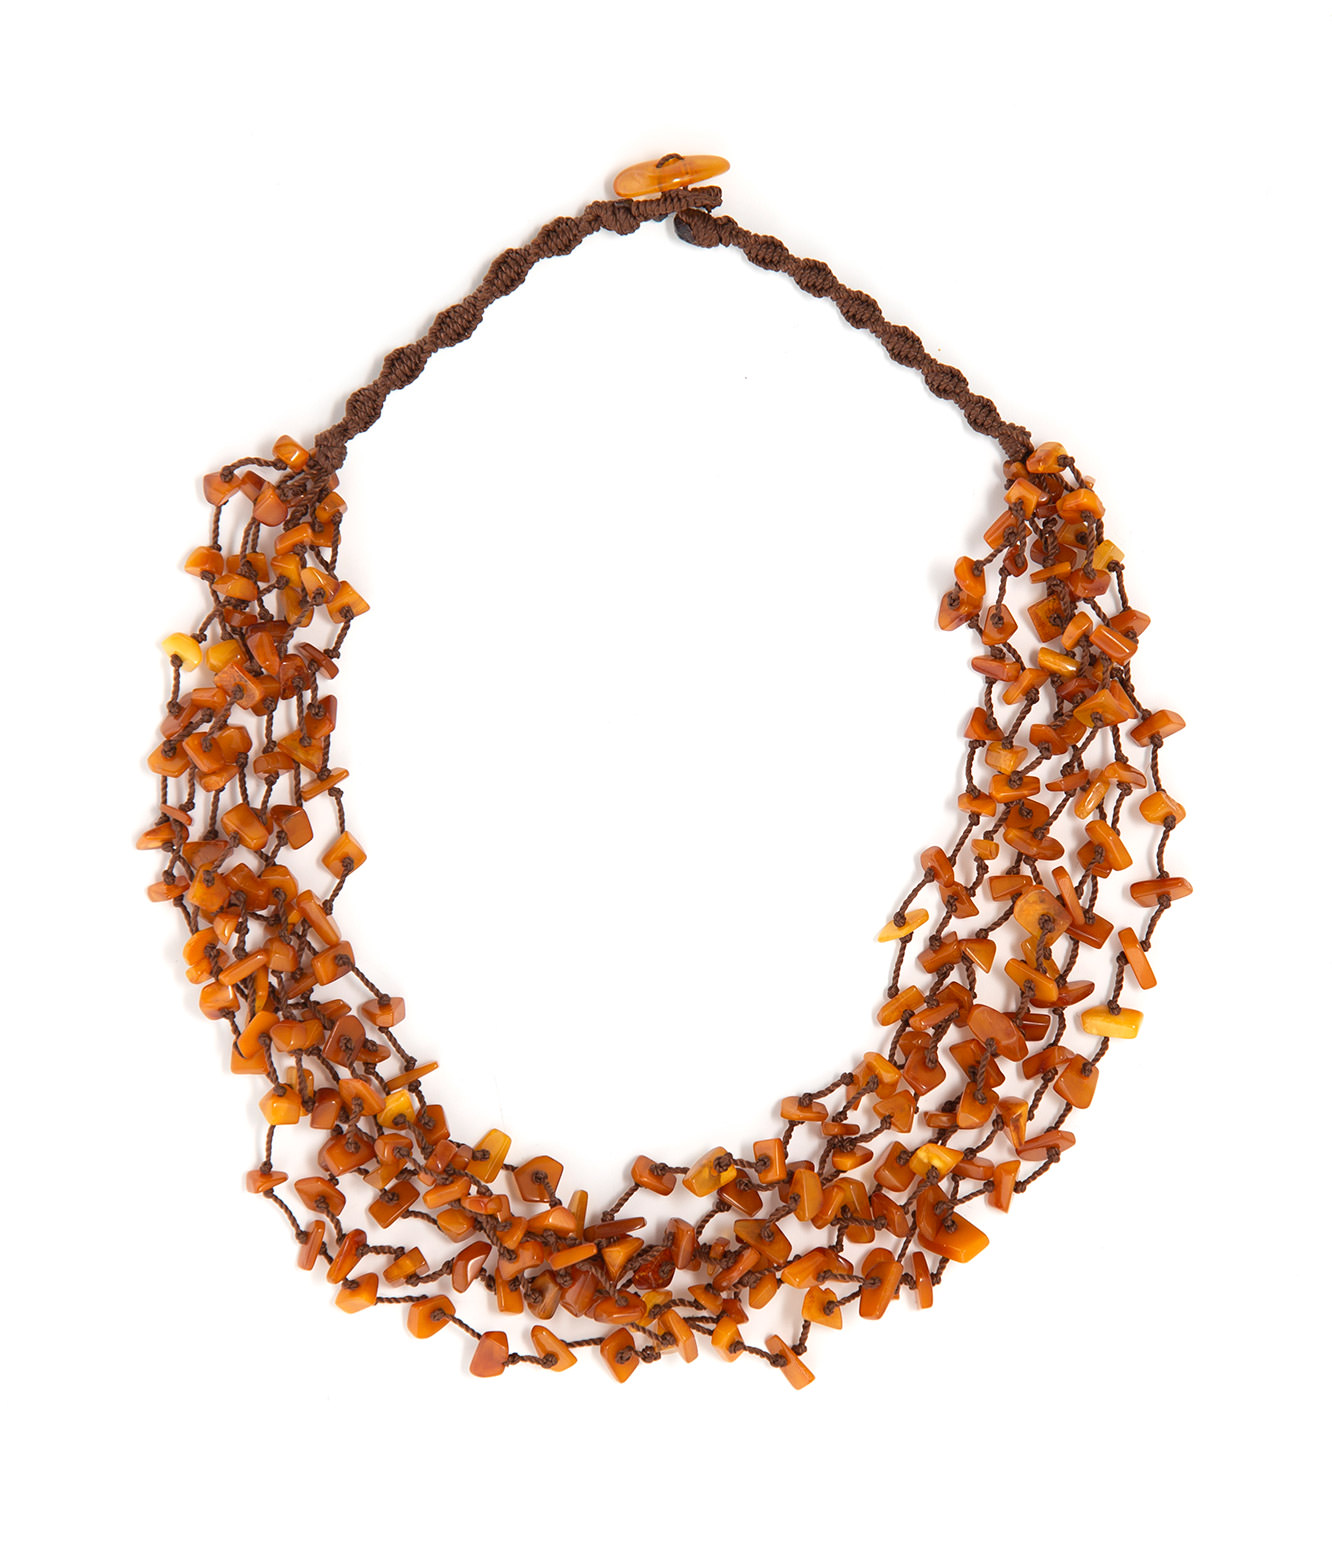 Necklace made of genuine amber from Baltic sea - cut by hand .